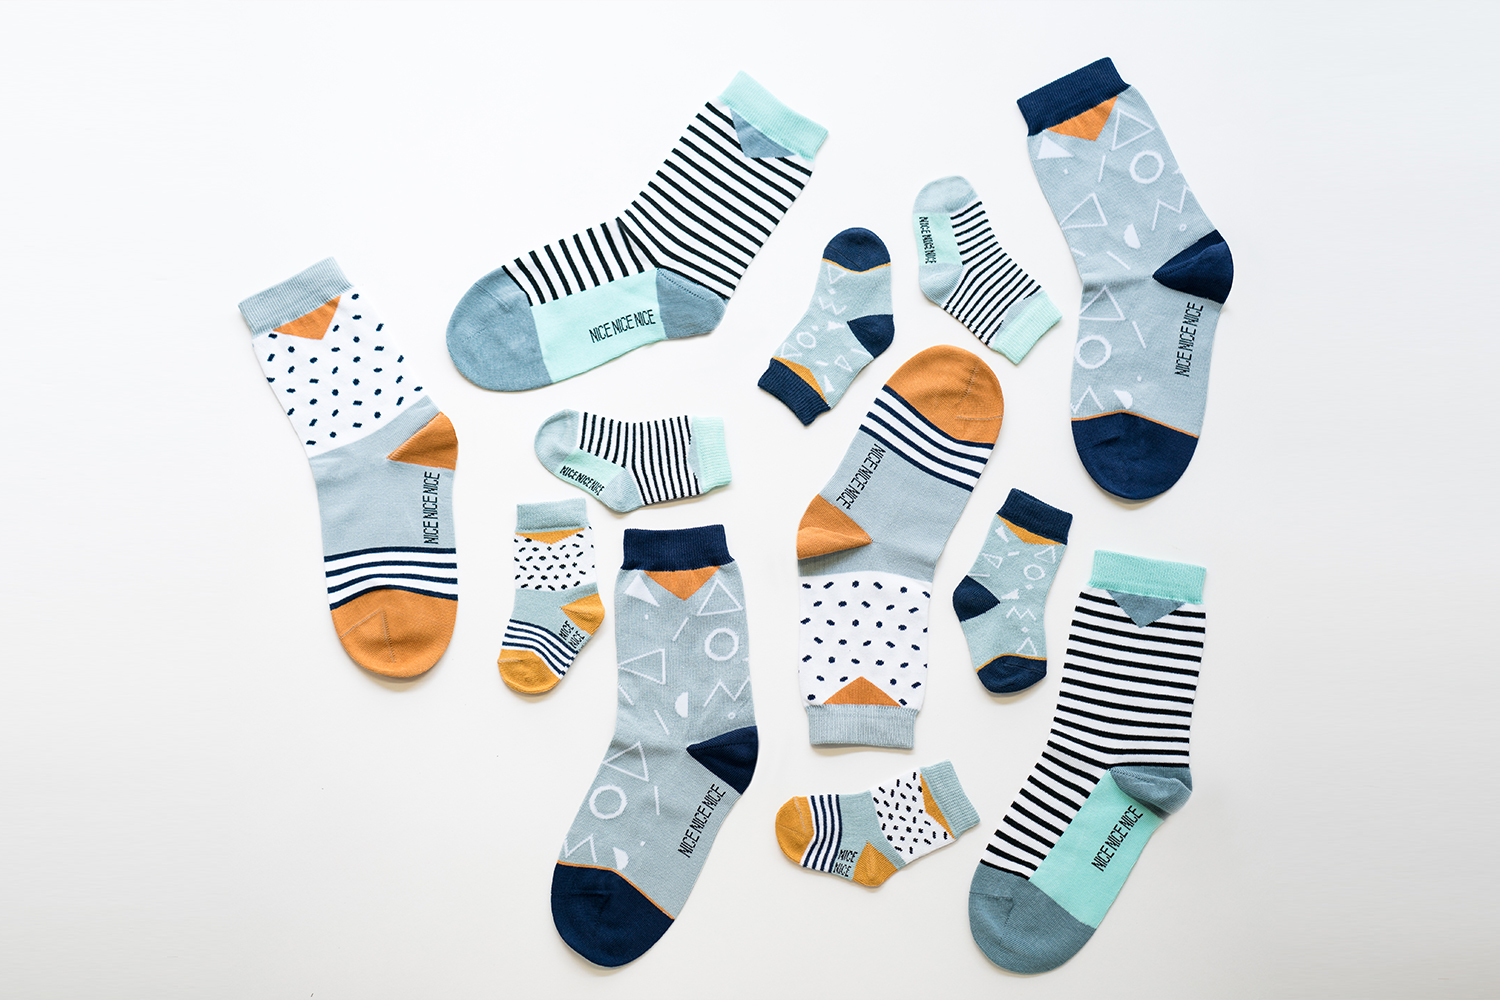  The fun, colorful and patterned socks by  NiceNiceNice . 